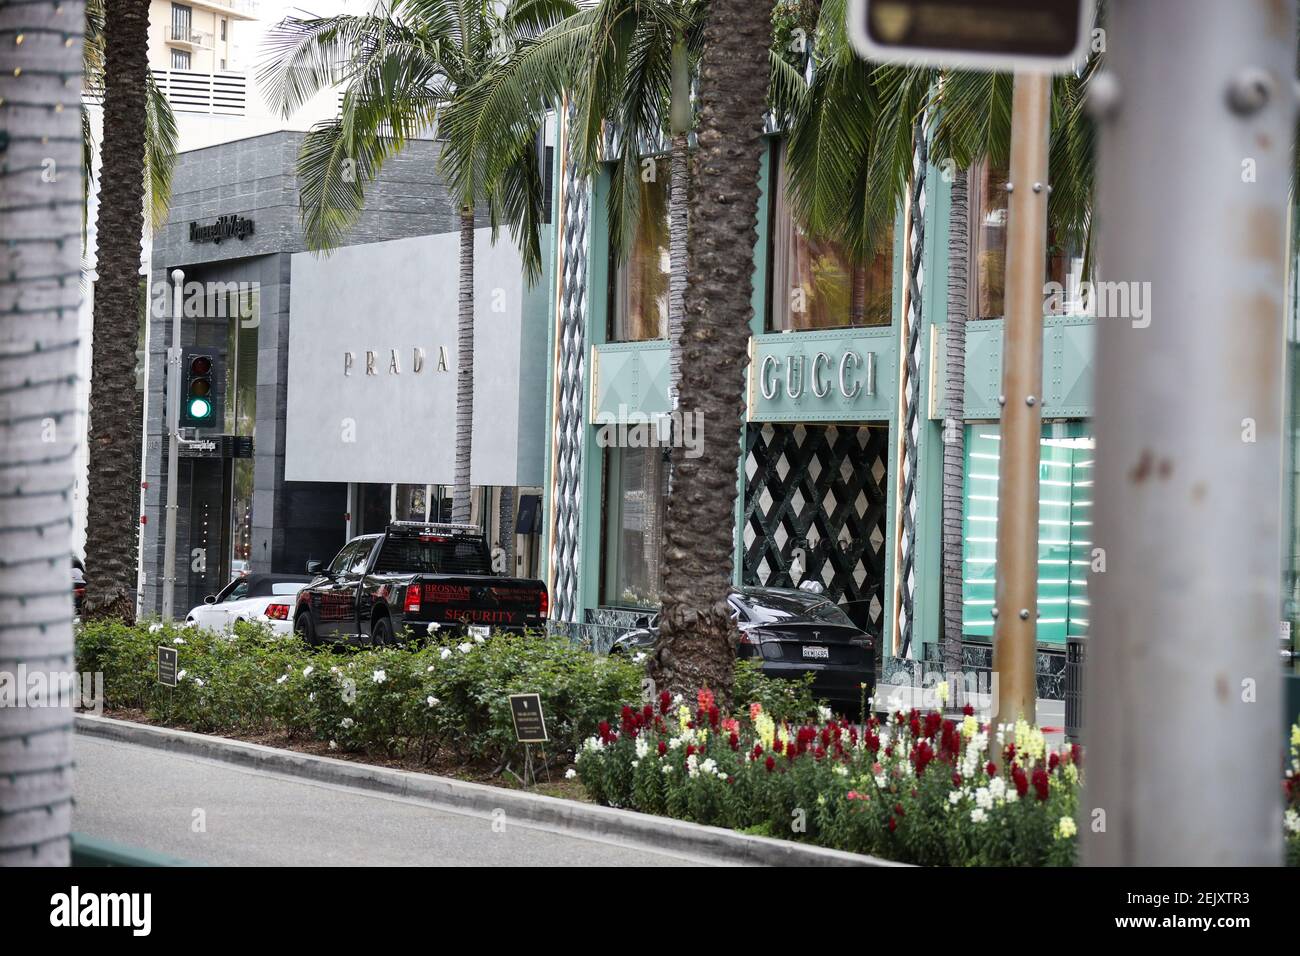 BEVERLY HILLS, LOS ANGELES, CALIFORNIA, USA - MARCH 31: A view of Prada  Beverly Hills Rodeo Drive store and GUCCI Beverly Hills Rodeo Drive store  on March 31, 2020 in Beverly Hills,